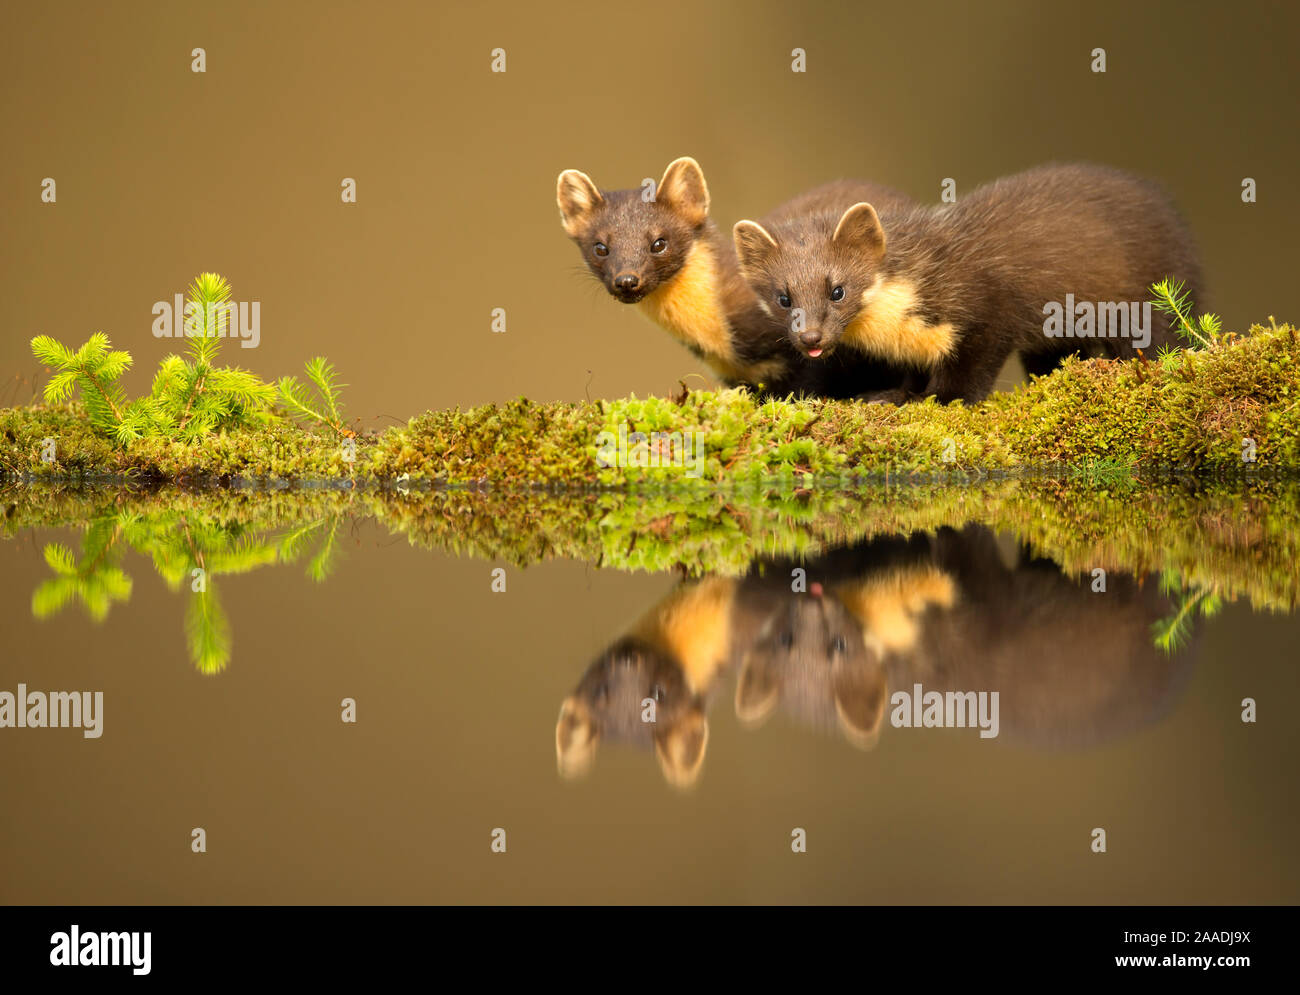 Pine marten (Martes martes) reflected in water, Ardnamurchan Peninsula, west coast of Scotland, UK. Highly commended in the Mammals category of the British Wildlife Photography Awards (BWPA) Competition 2017 Stock Photo